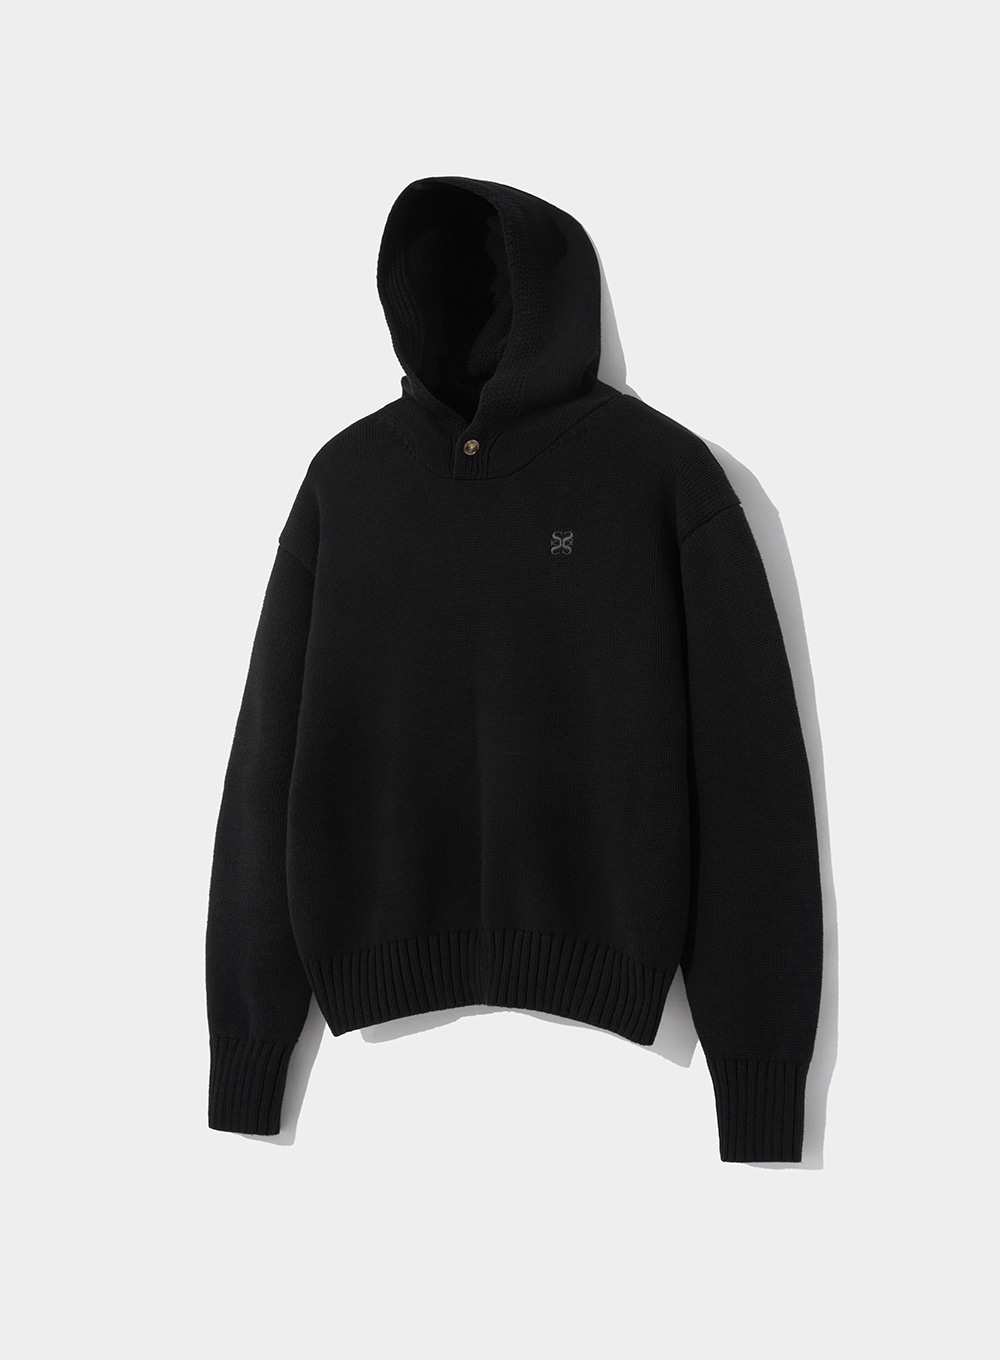 Two Tone Button Hood Knit - Classic Black